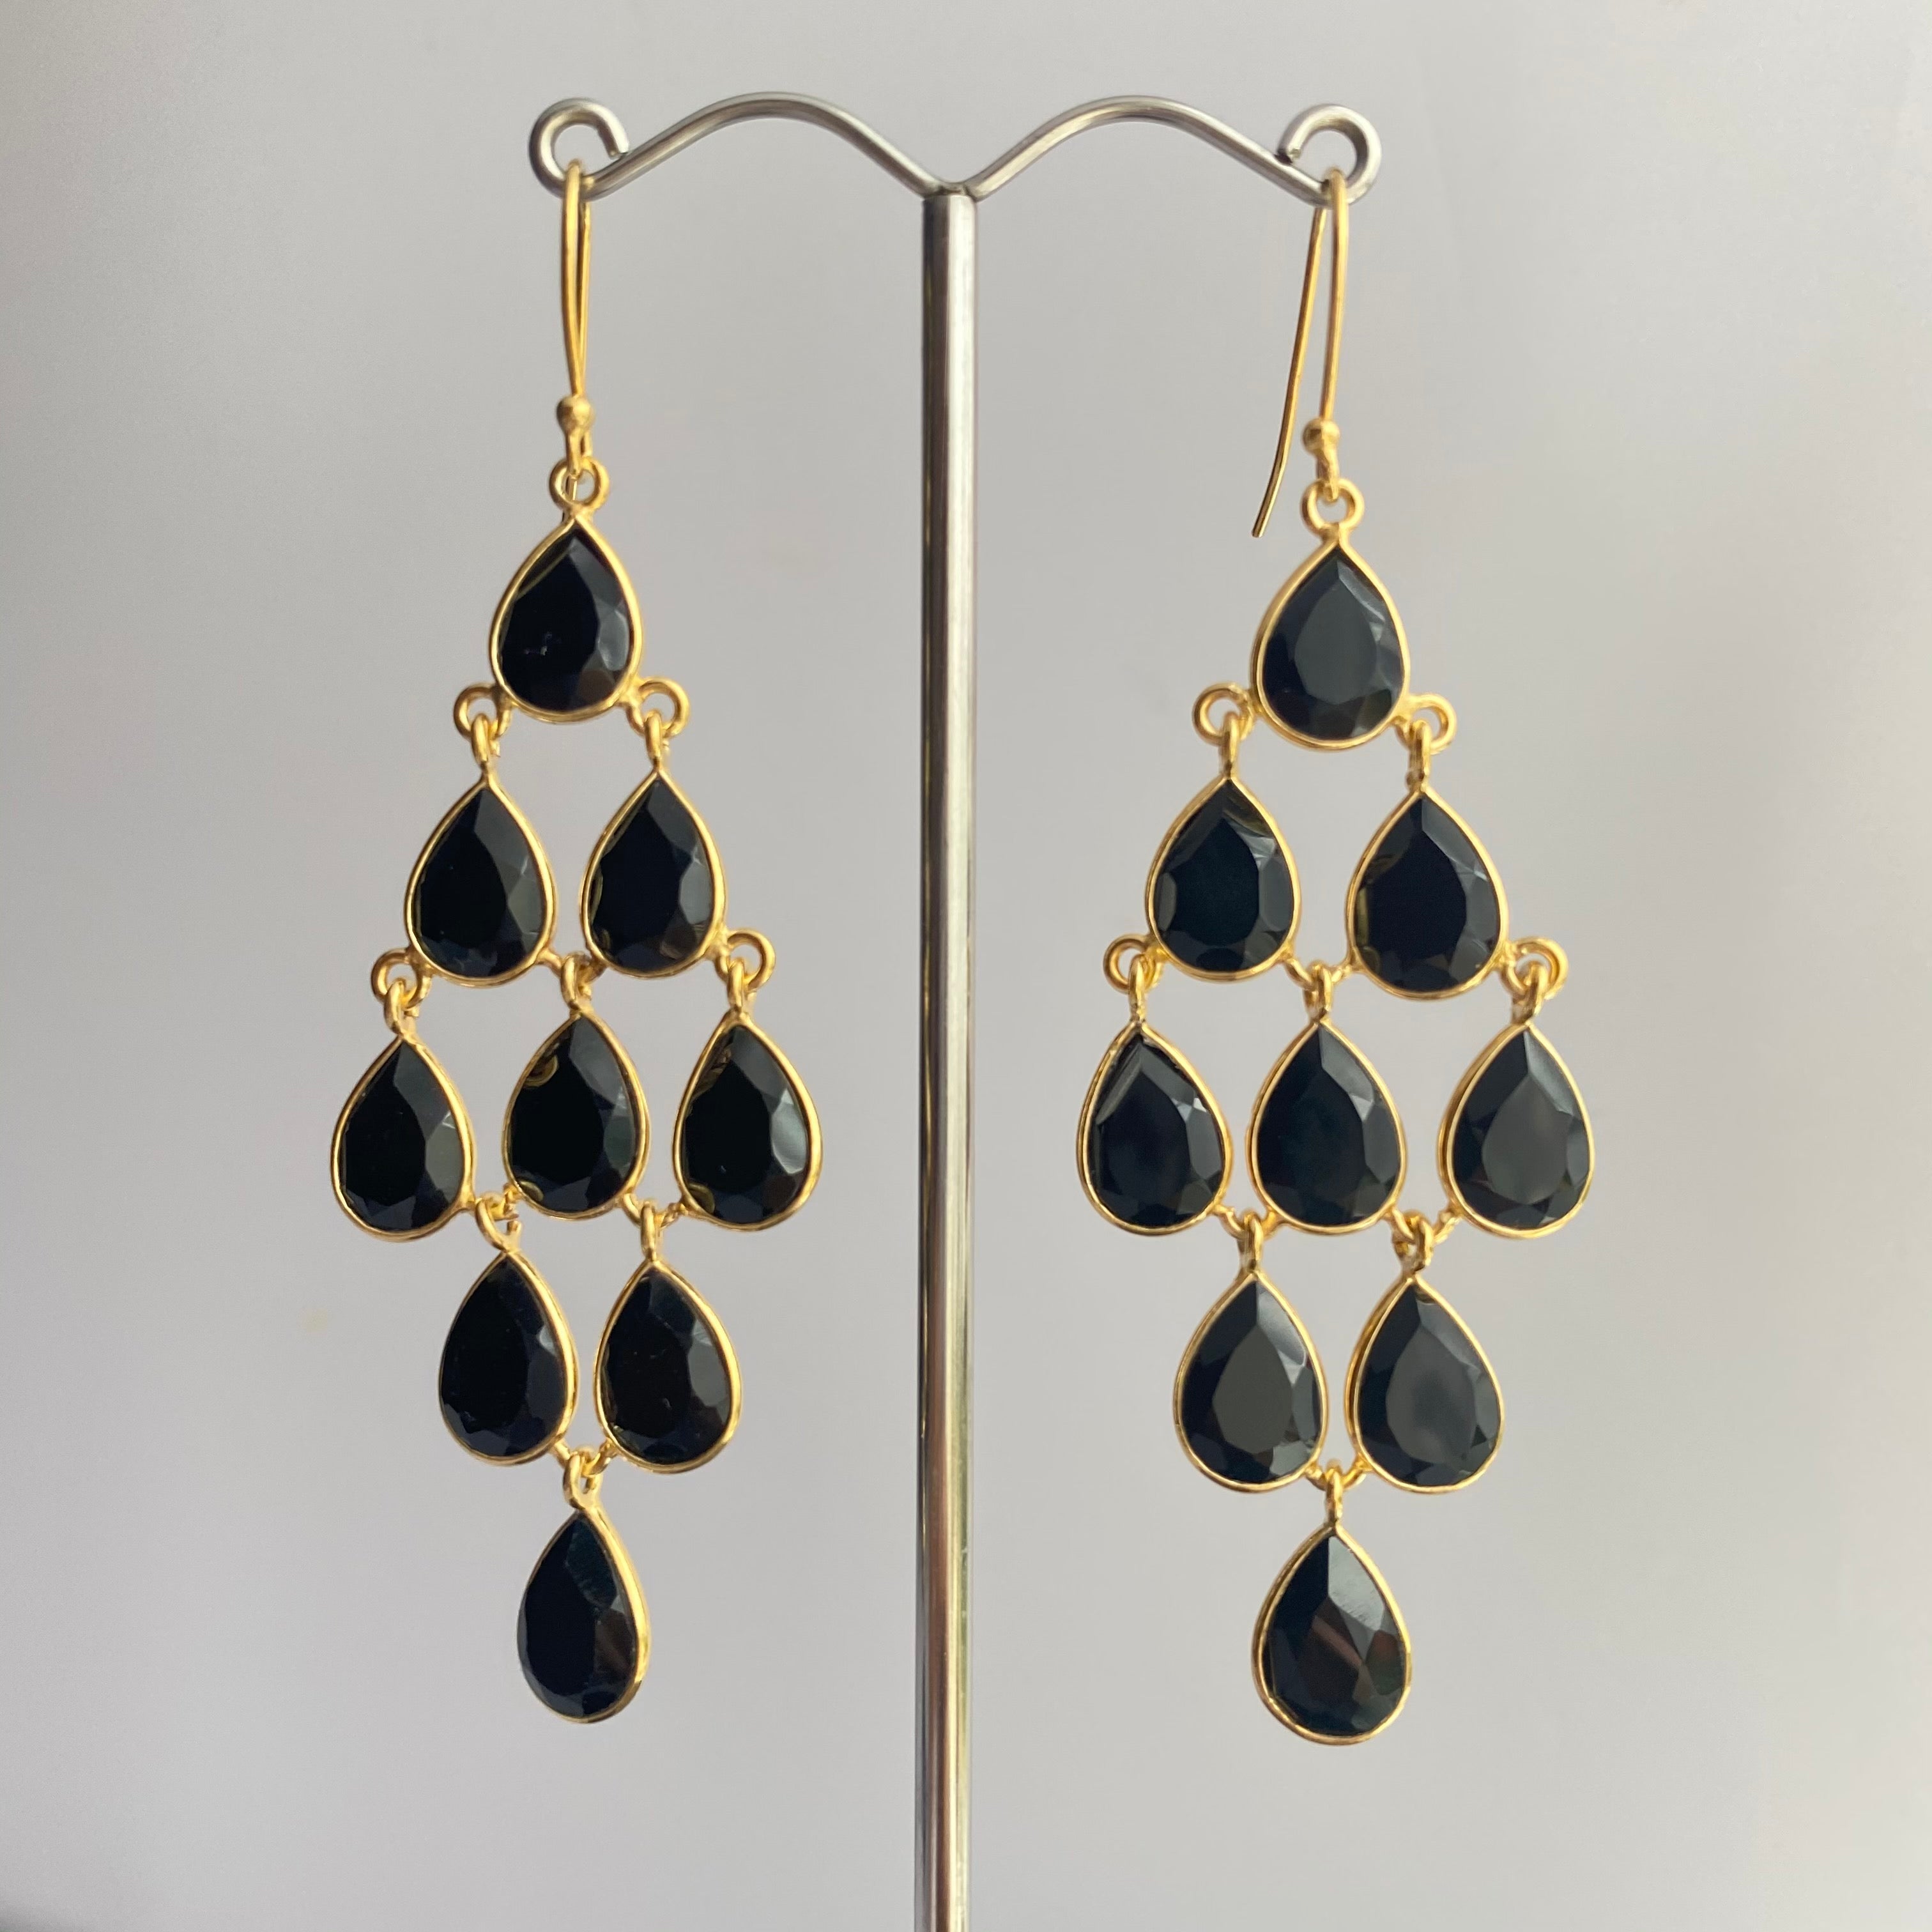 Gold Plated Sterling Silver Chandelier Earrings with Natural Gemstones  - Black Onyx